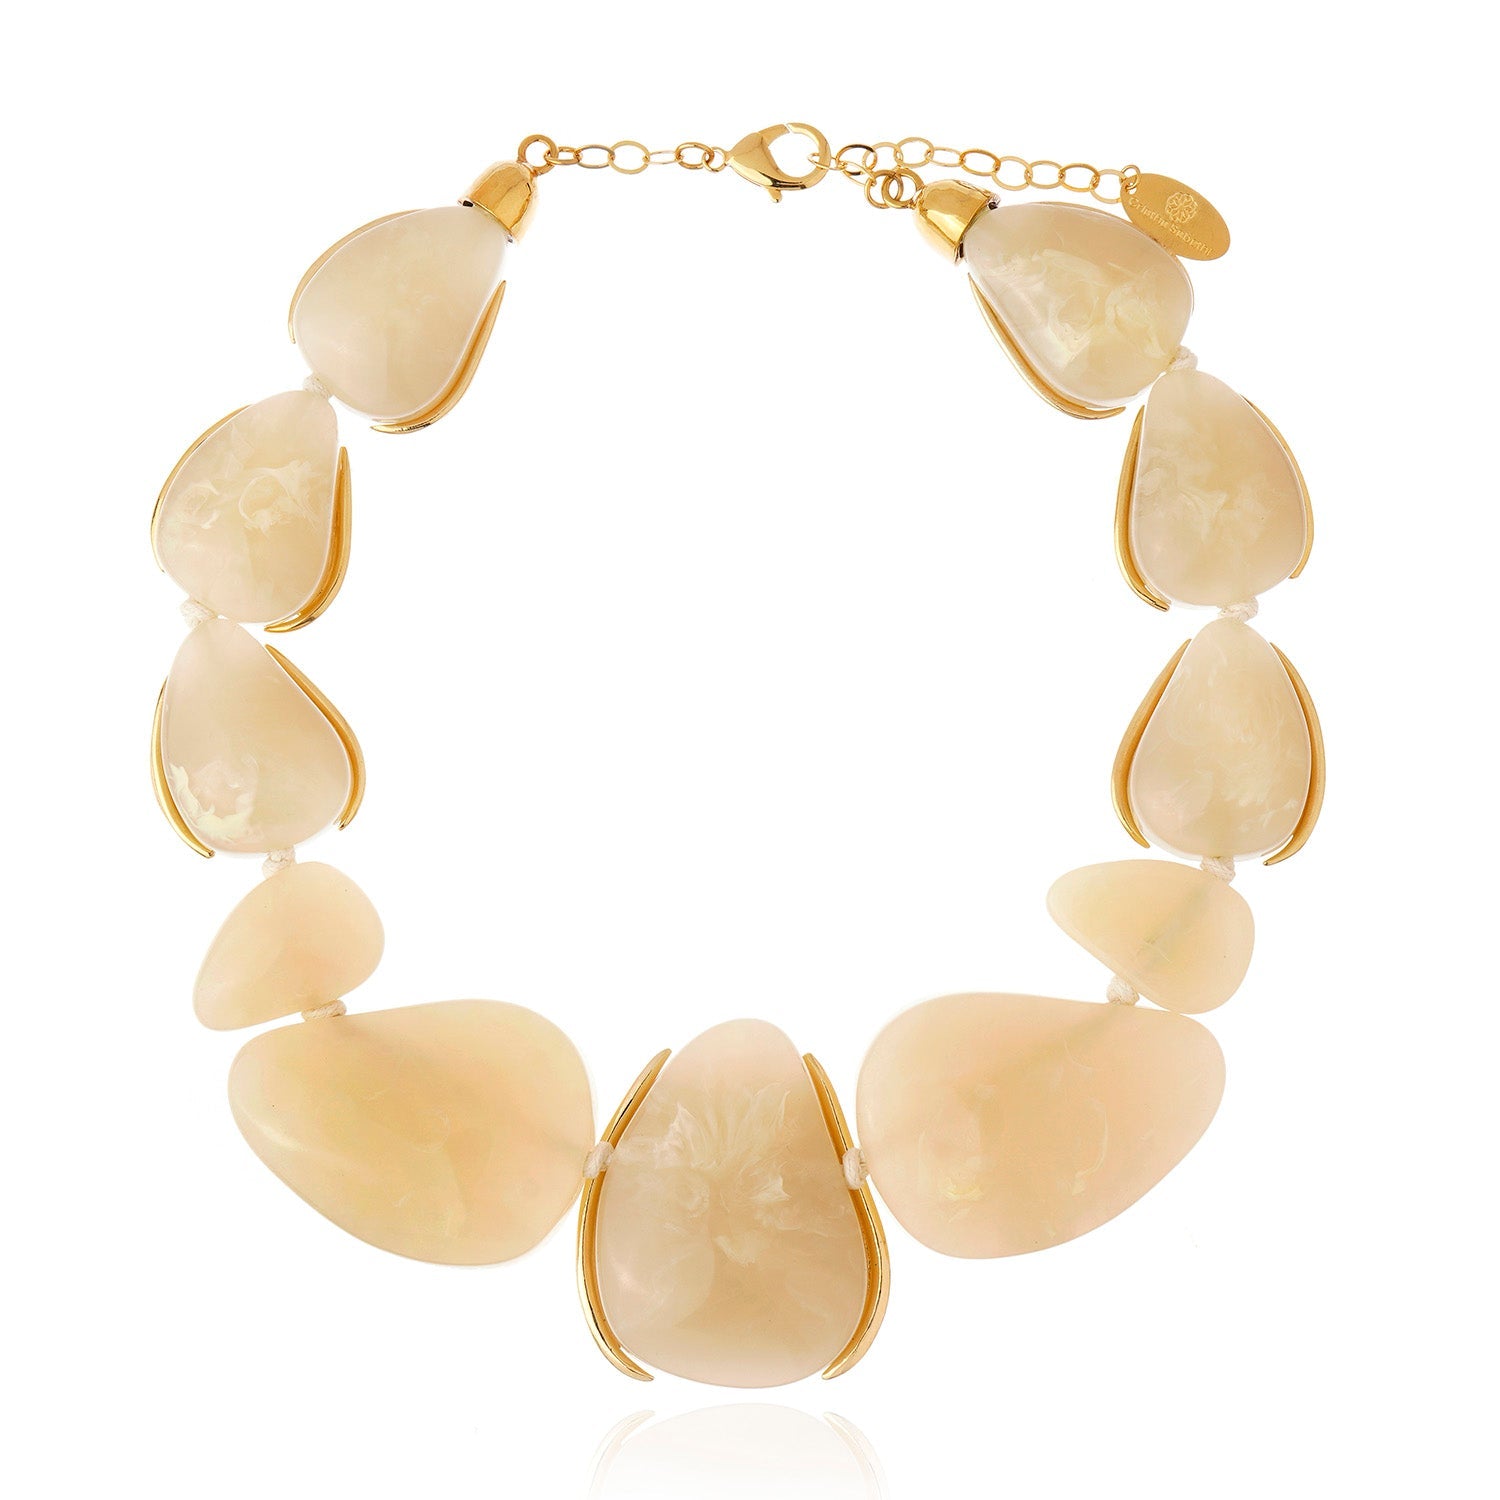 Organic Concept Resin Necklace - Sand